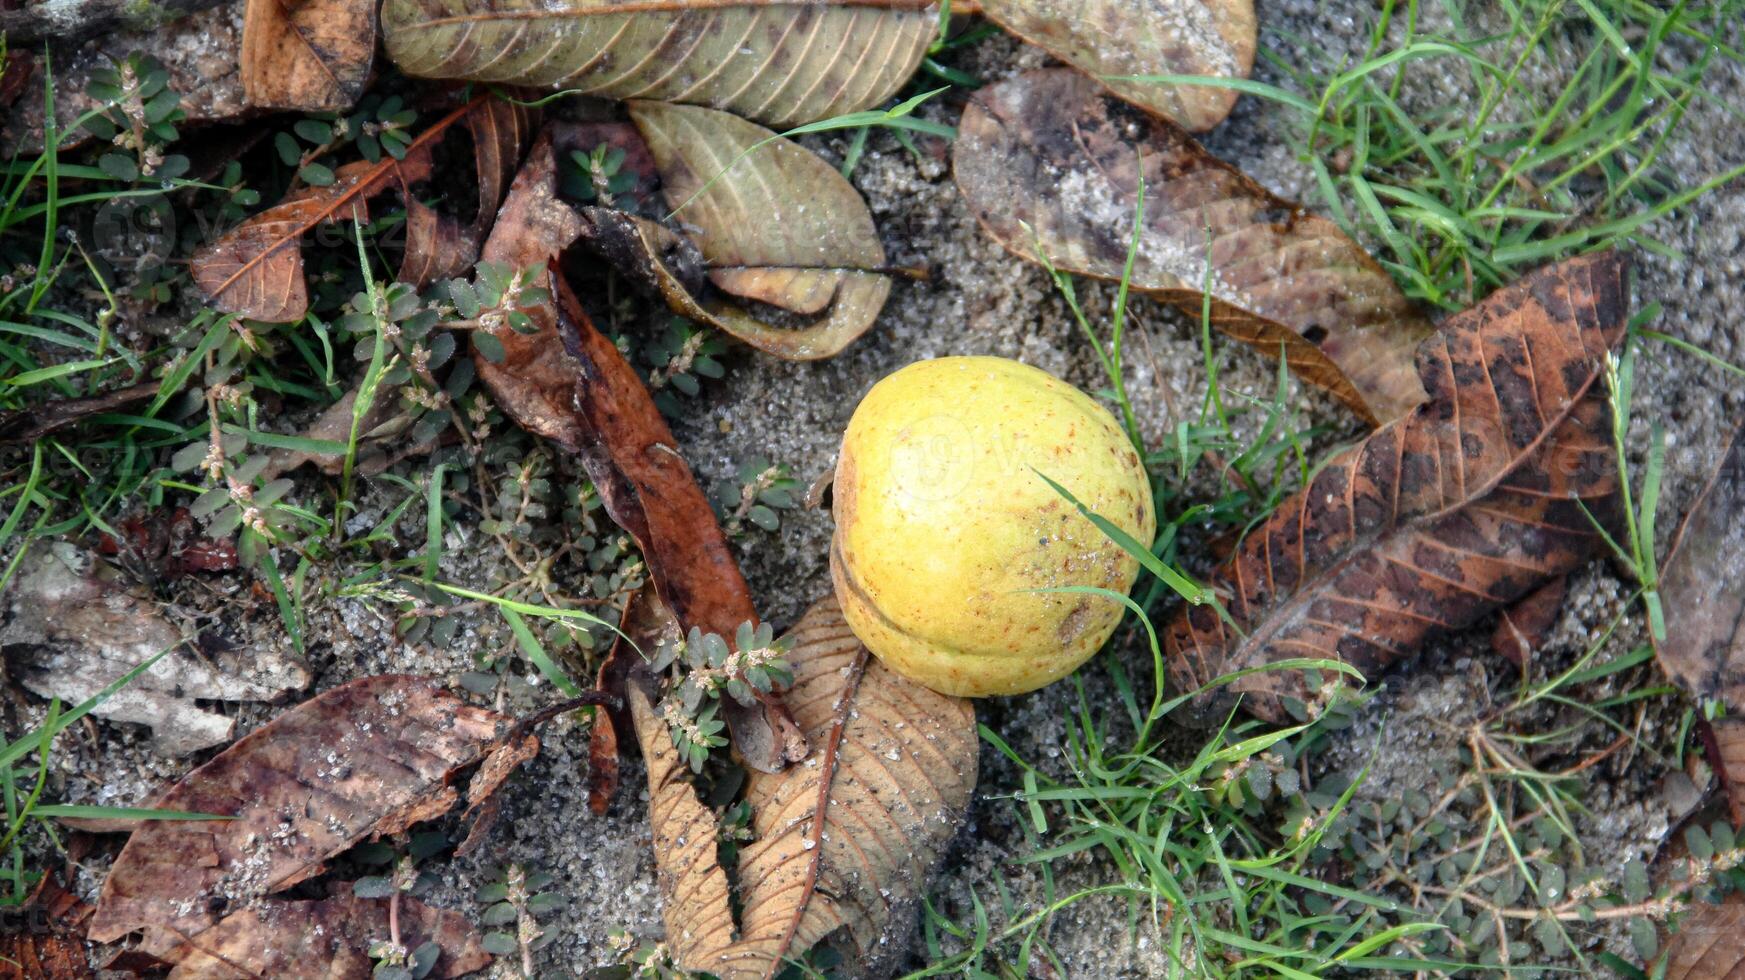 Ripe guavas that fall on the ground photo